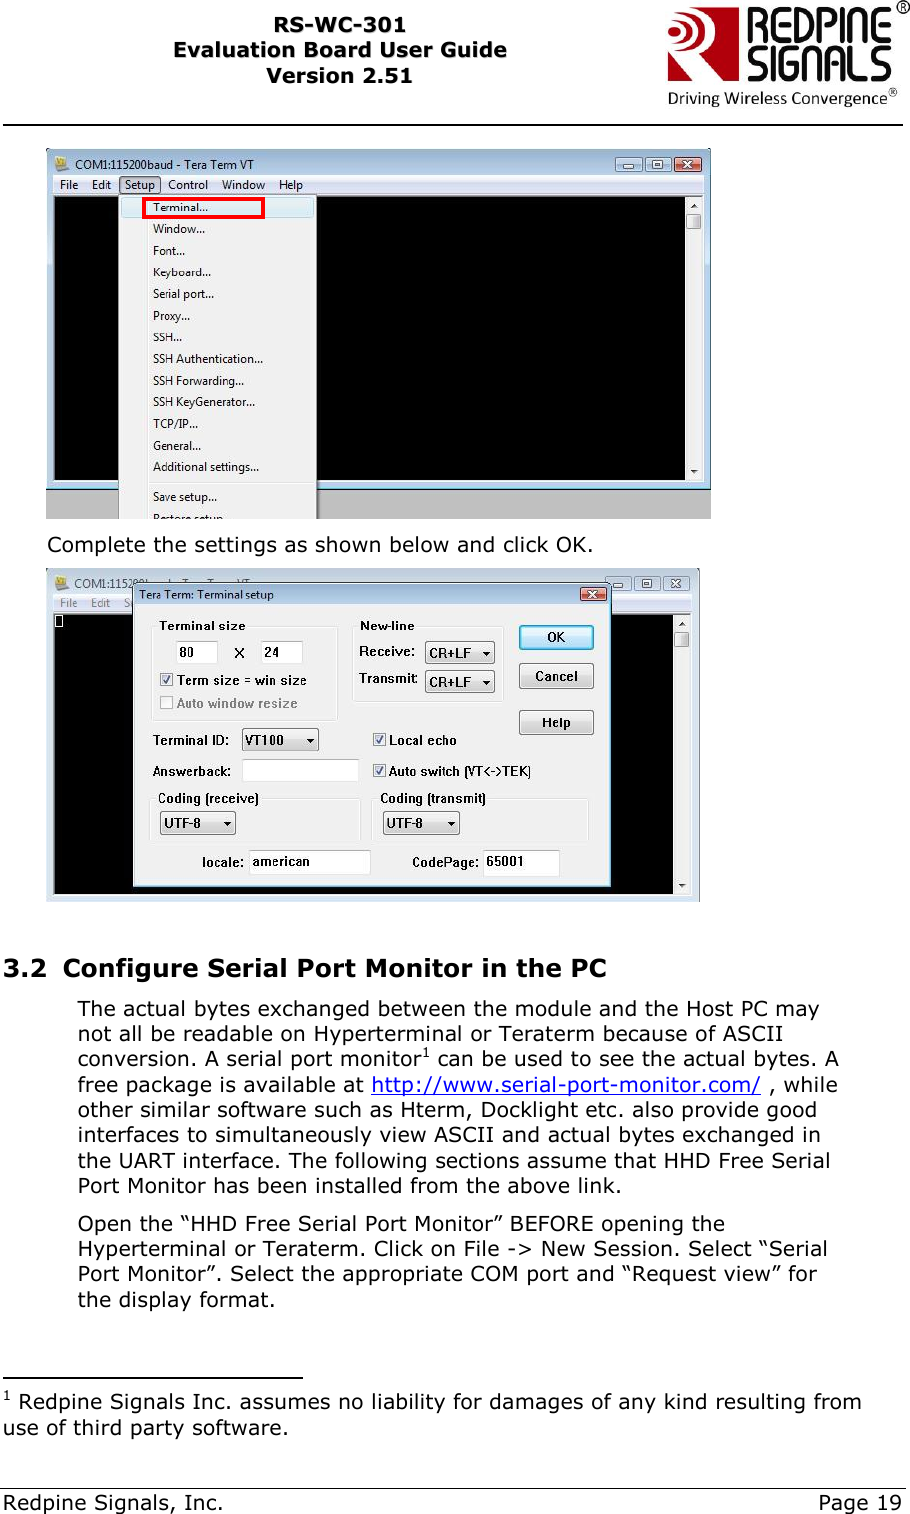     Redpine Signals, Inc.     Page 19 RRSS--WWCC--330011    EEvvaalluuaattiioonn  BBooaarrdd  UUsseerr  GGuuiiddee  VVeerrssiioonn  22..5511     Complete the settings as shown below and click OK.   3.2 Configure Serial Port Monitor in the PC The actual bytes exchanged between the module and the Host PC may not all be readable on Hyperterminal or Teraterm because of ASCII conversion. A serial port monitor1 can be used to see the actual bytes. A free package is available at http://www.serial-port-monitor.com/ , while other similar software such as Hterm, Docklight etc. also provide good interfaces to simultaneously view ASCII and actual bytes exchanged in the UART interface. The following sections assume that HHD Free Serial Port Monitor has been installed from the above link.  Open the “HHD Free Serial Port Monitor” BEFORE opening the Hyperterminal or Teraterm. Click on File -&gt; New Session. Select “Serial Port Monitor”. Select the appropriate COM port and “Request view” for the display format.                                              1 Redpine Signals Inc. assumes no liability for damages of any kind resulting from use of third party software. 